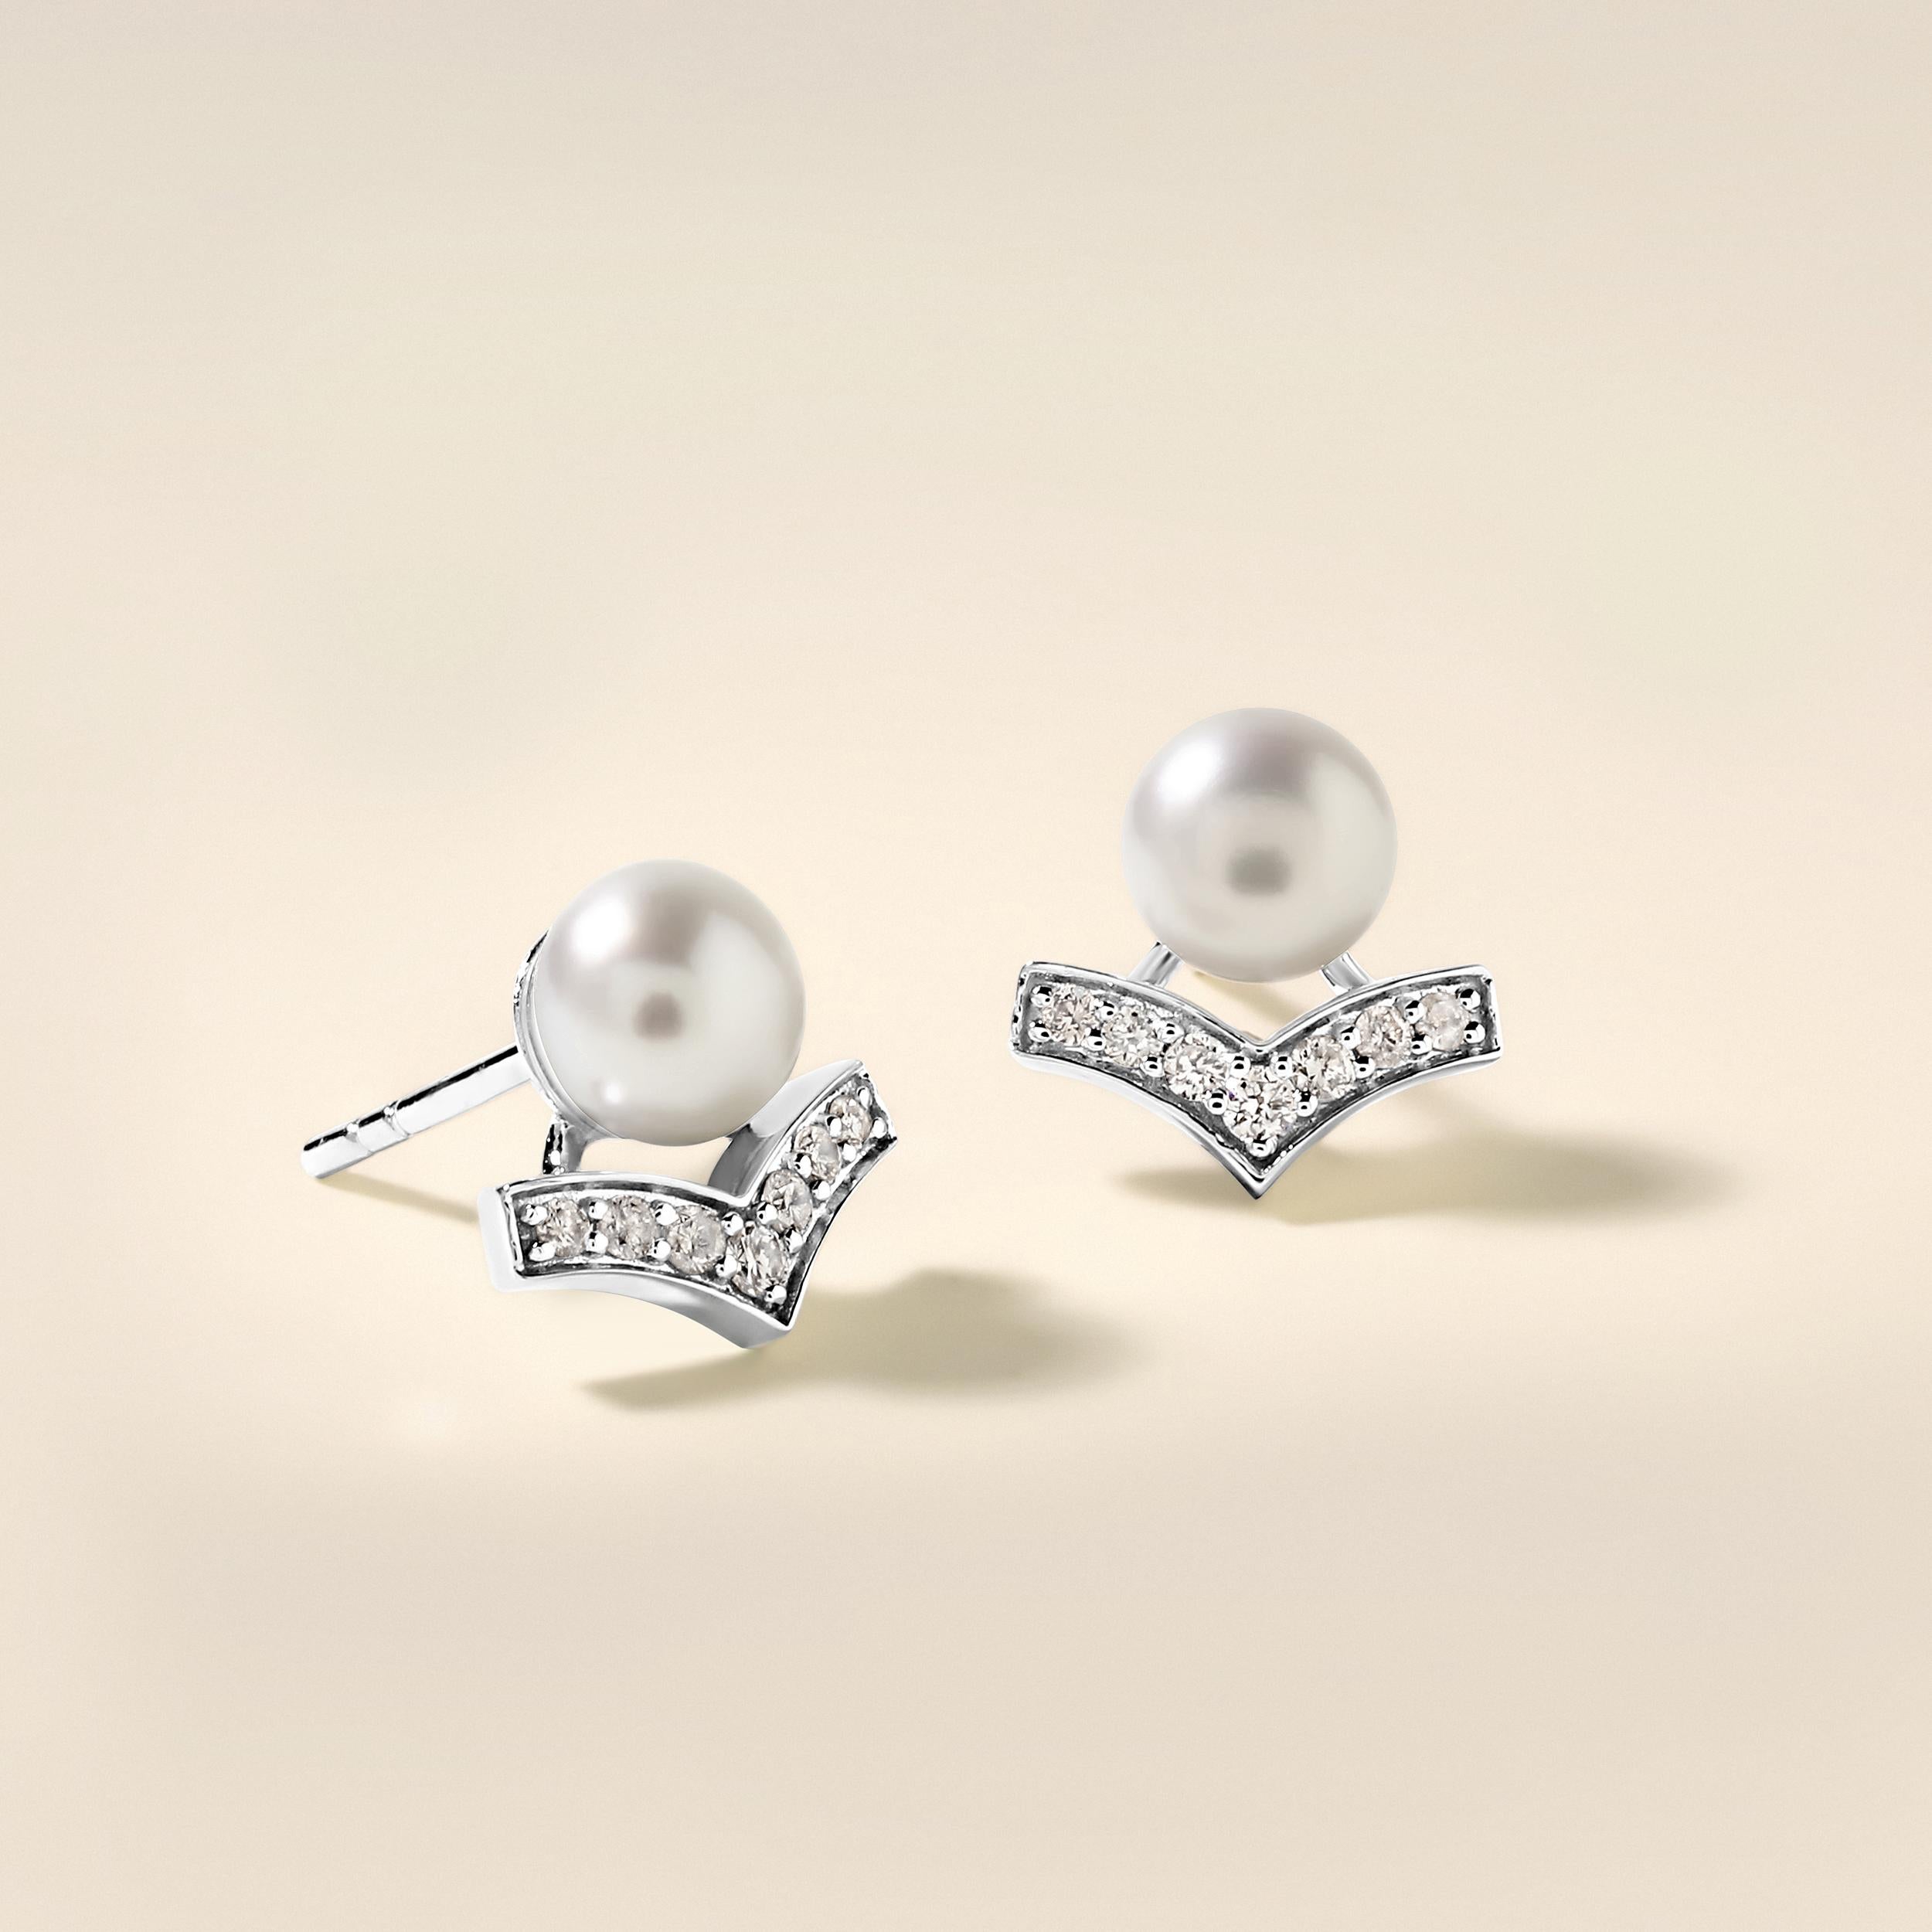 Crafted in 3.02 grams of 14K White Gold, the earrings contains 14 stones of Round Diamonds with a total of 0.19 carat in F-G color and I1-I2 clarity combined with 2 stones of Cultured Pearls with a total of 2.74 carat.

CONTEMPORARY AND TIMELESS